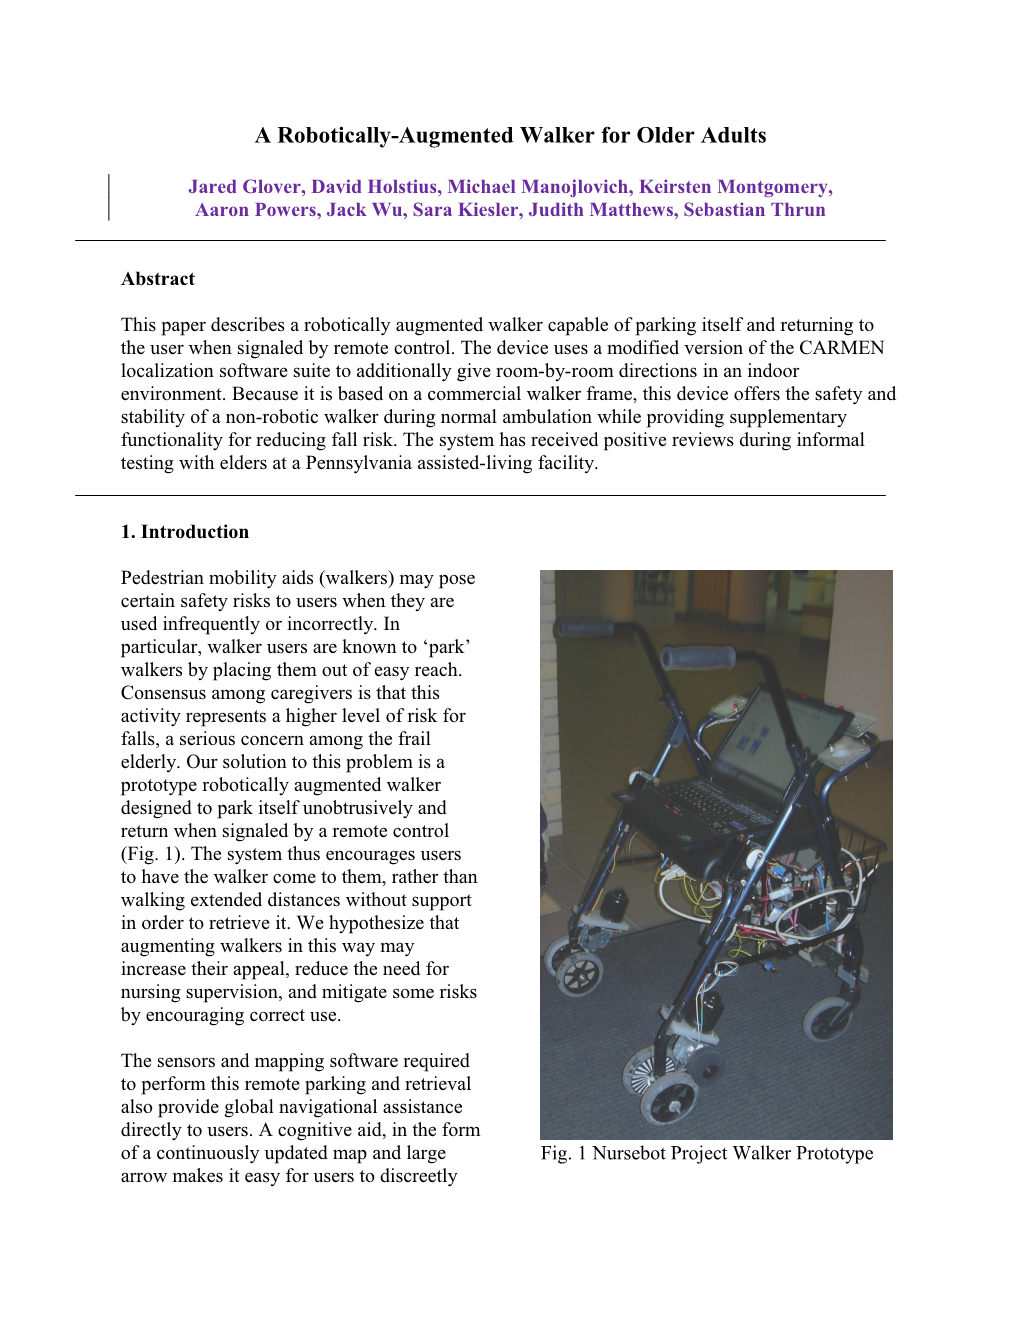 Preliminary Study in the Use of a Robotic Enhanced Walker in Providing Assistance to the Elderly